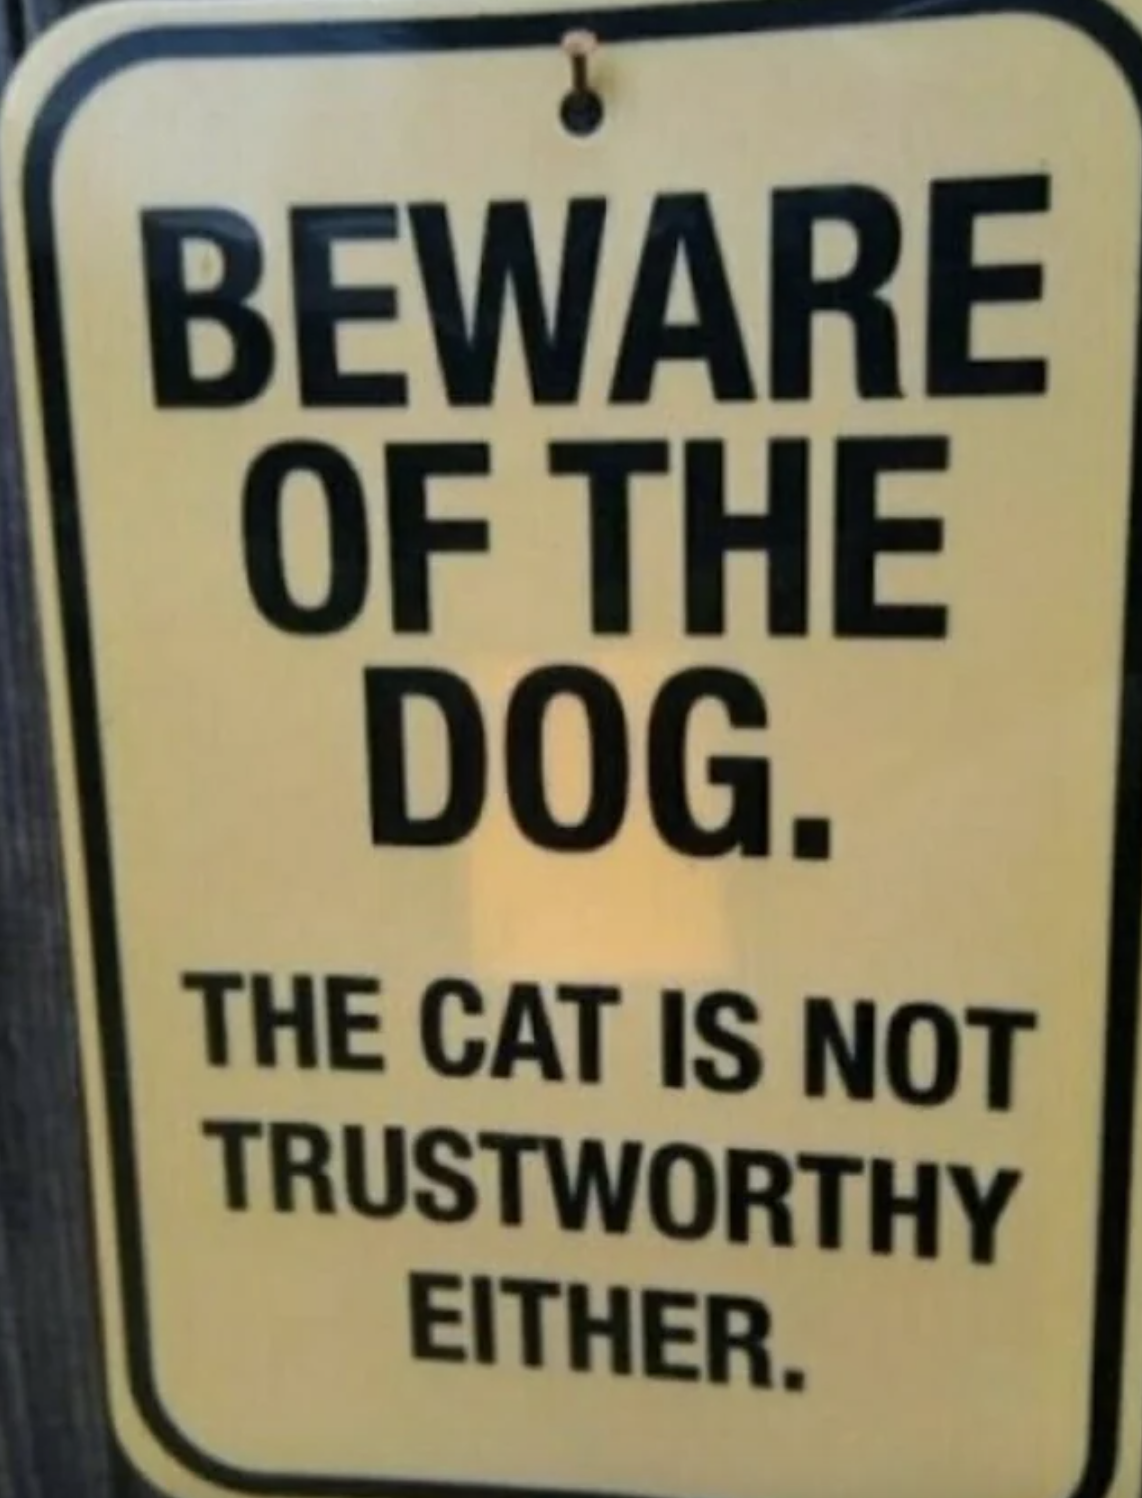 Warning sign: &quot;Beware of the dog; the cat is not trustworthy either&quot;